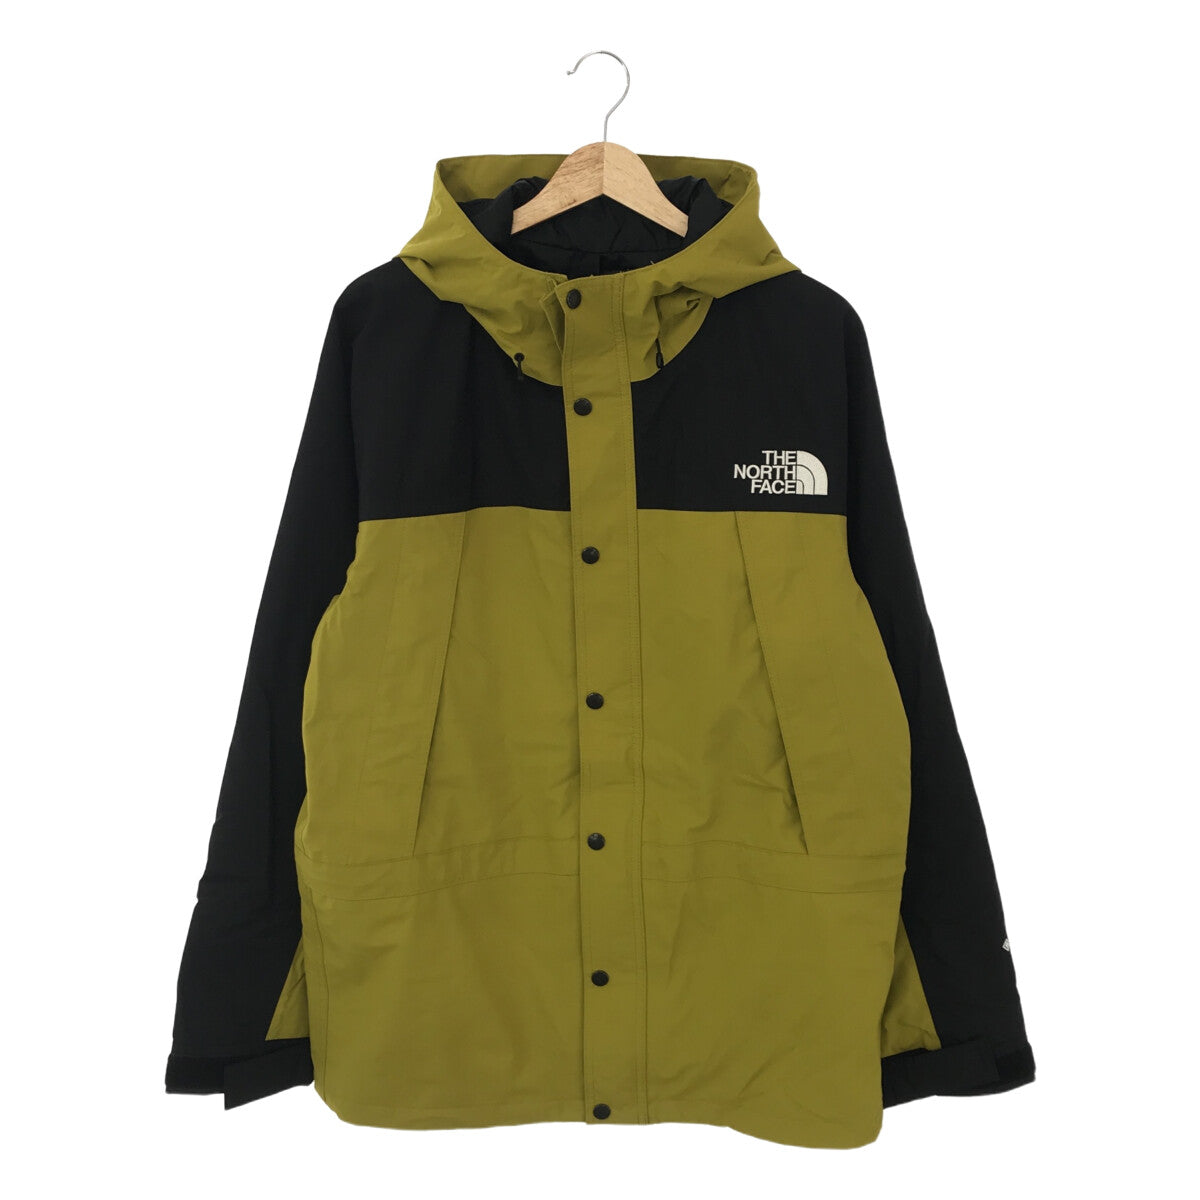 THE NORTH FACE / ザノースフェイス | Mountain Light Jacket 